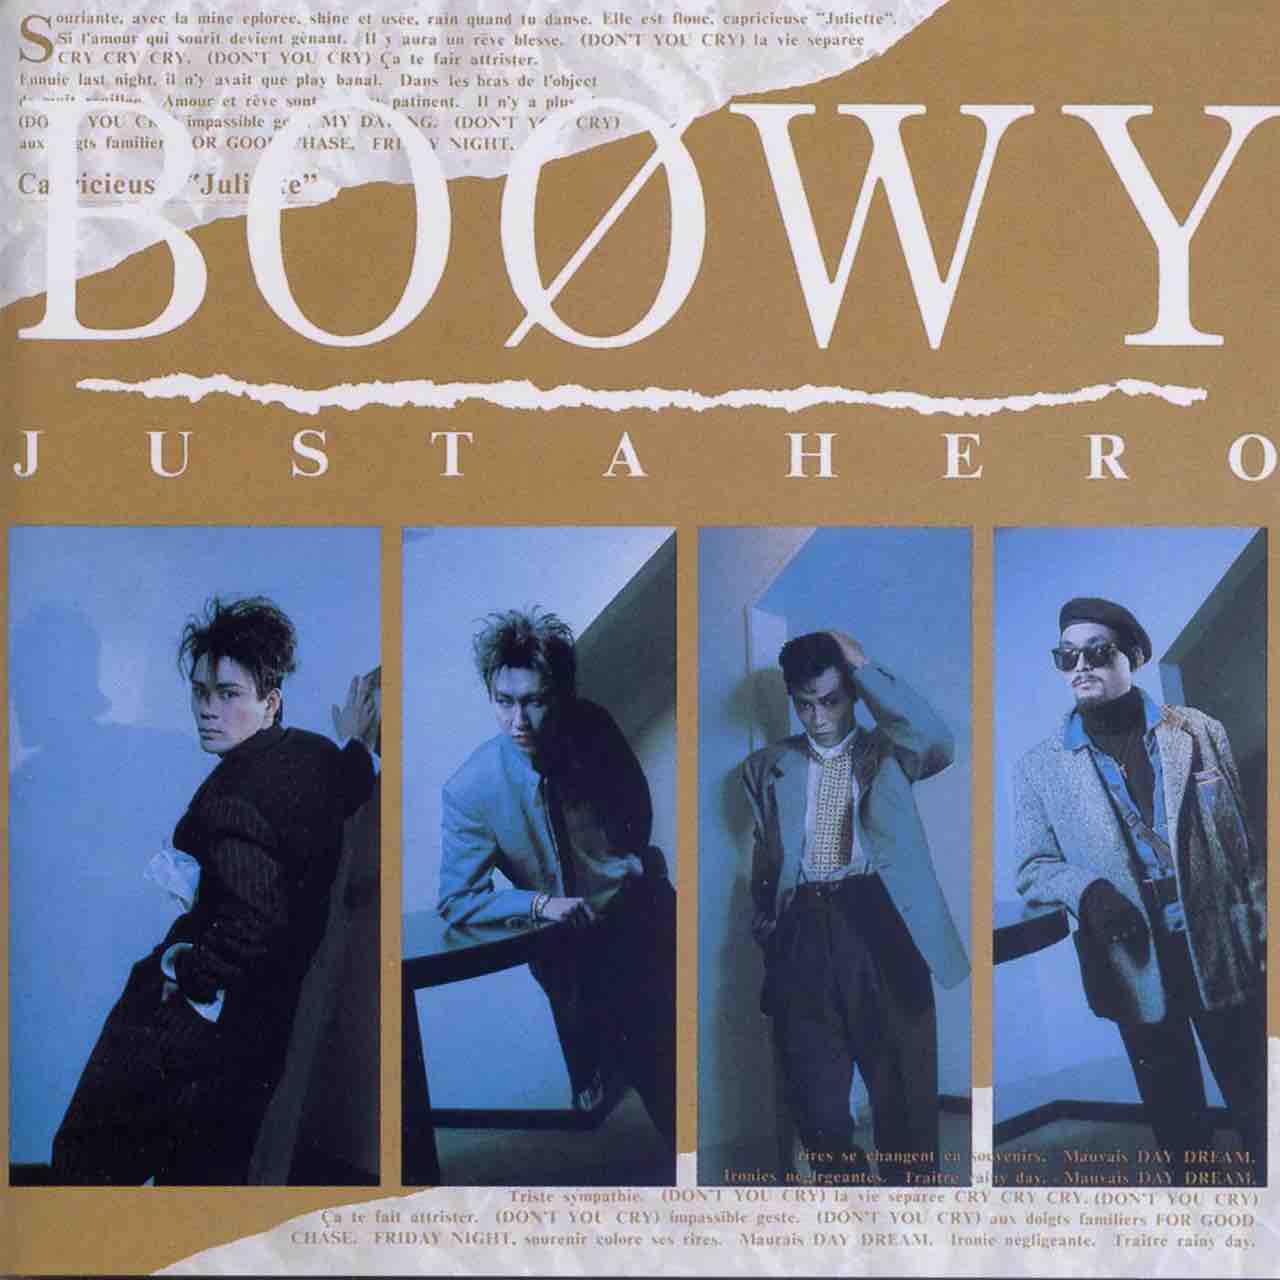 Boowy Just A Hero 今日はこんな感じ